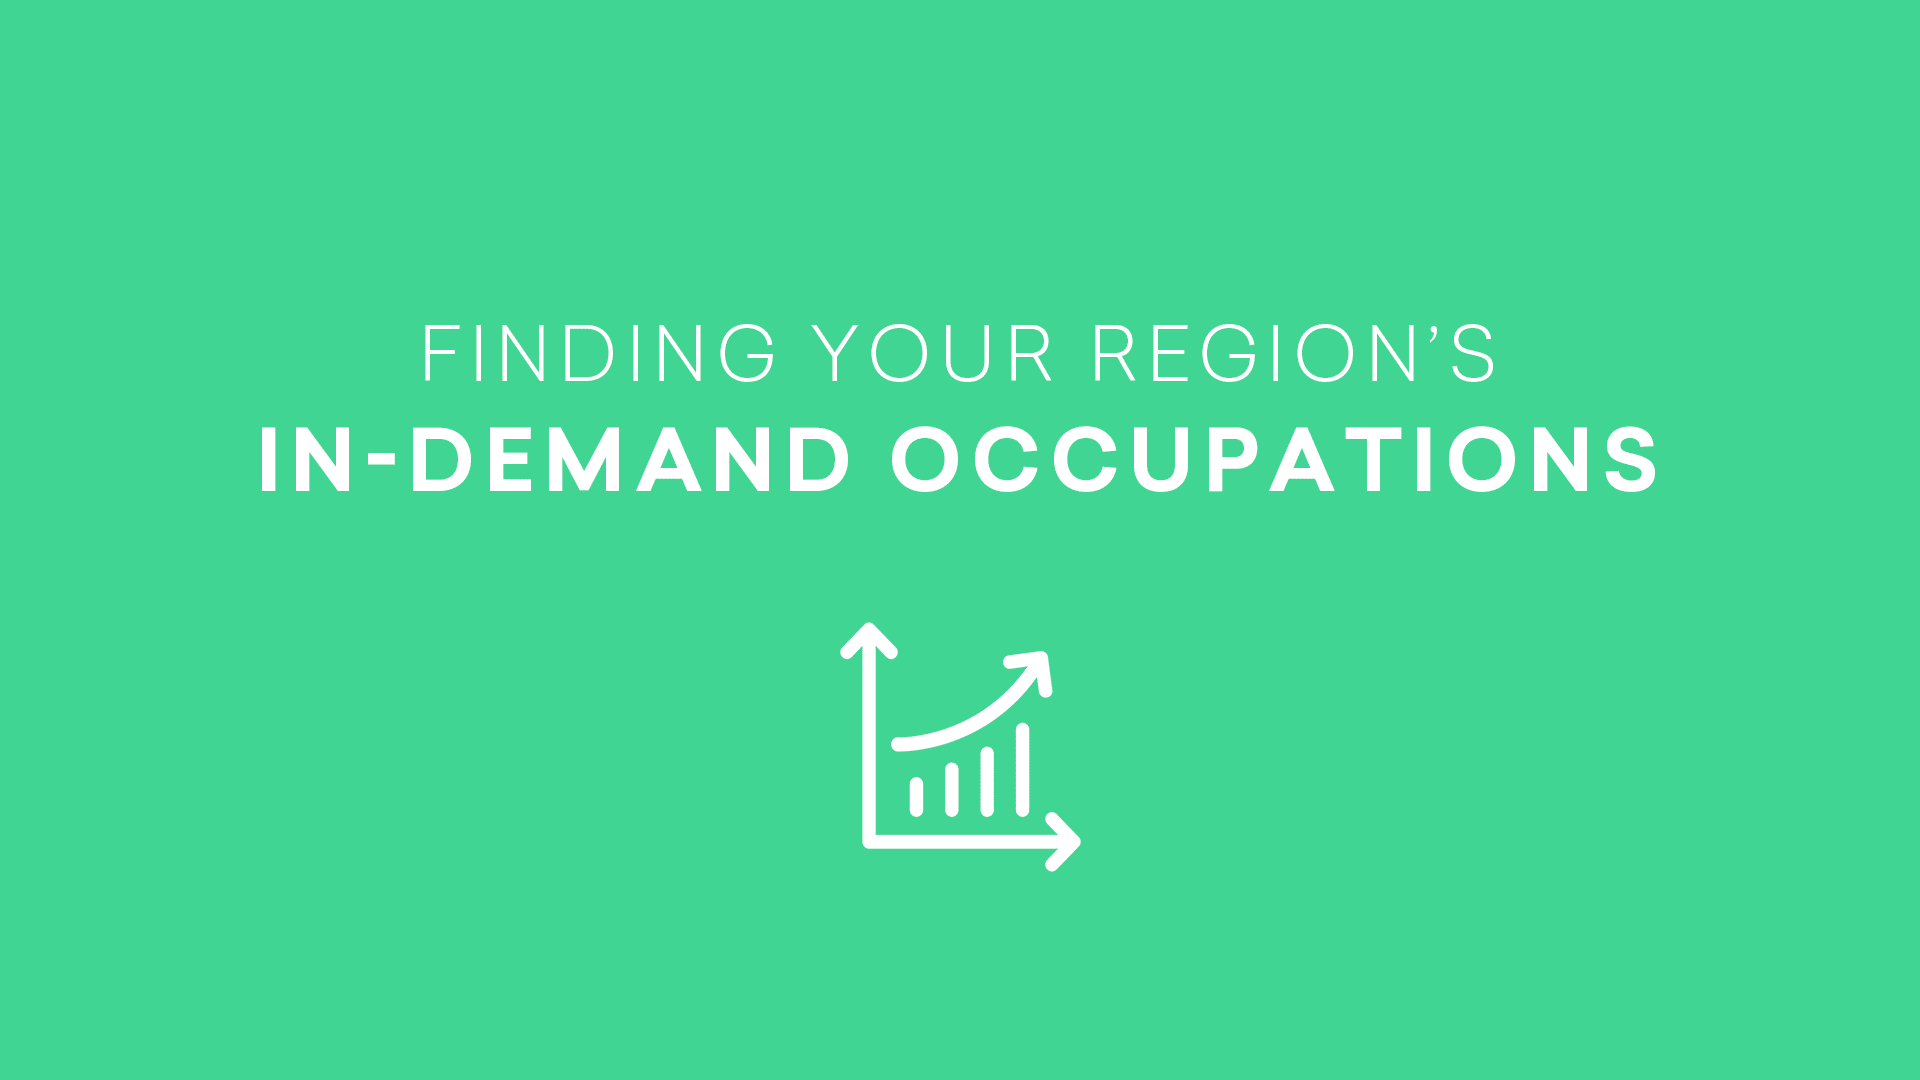 How to Find Your Region’s In-Demand Occupations